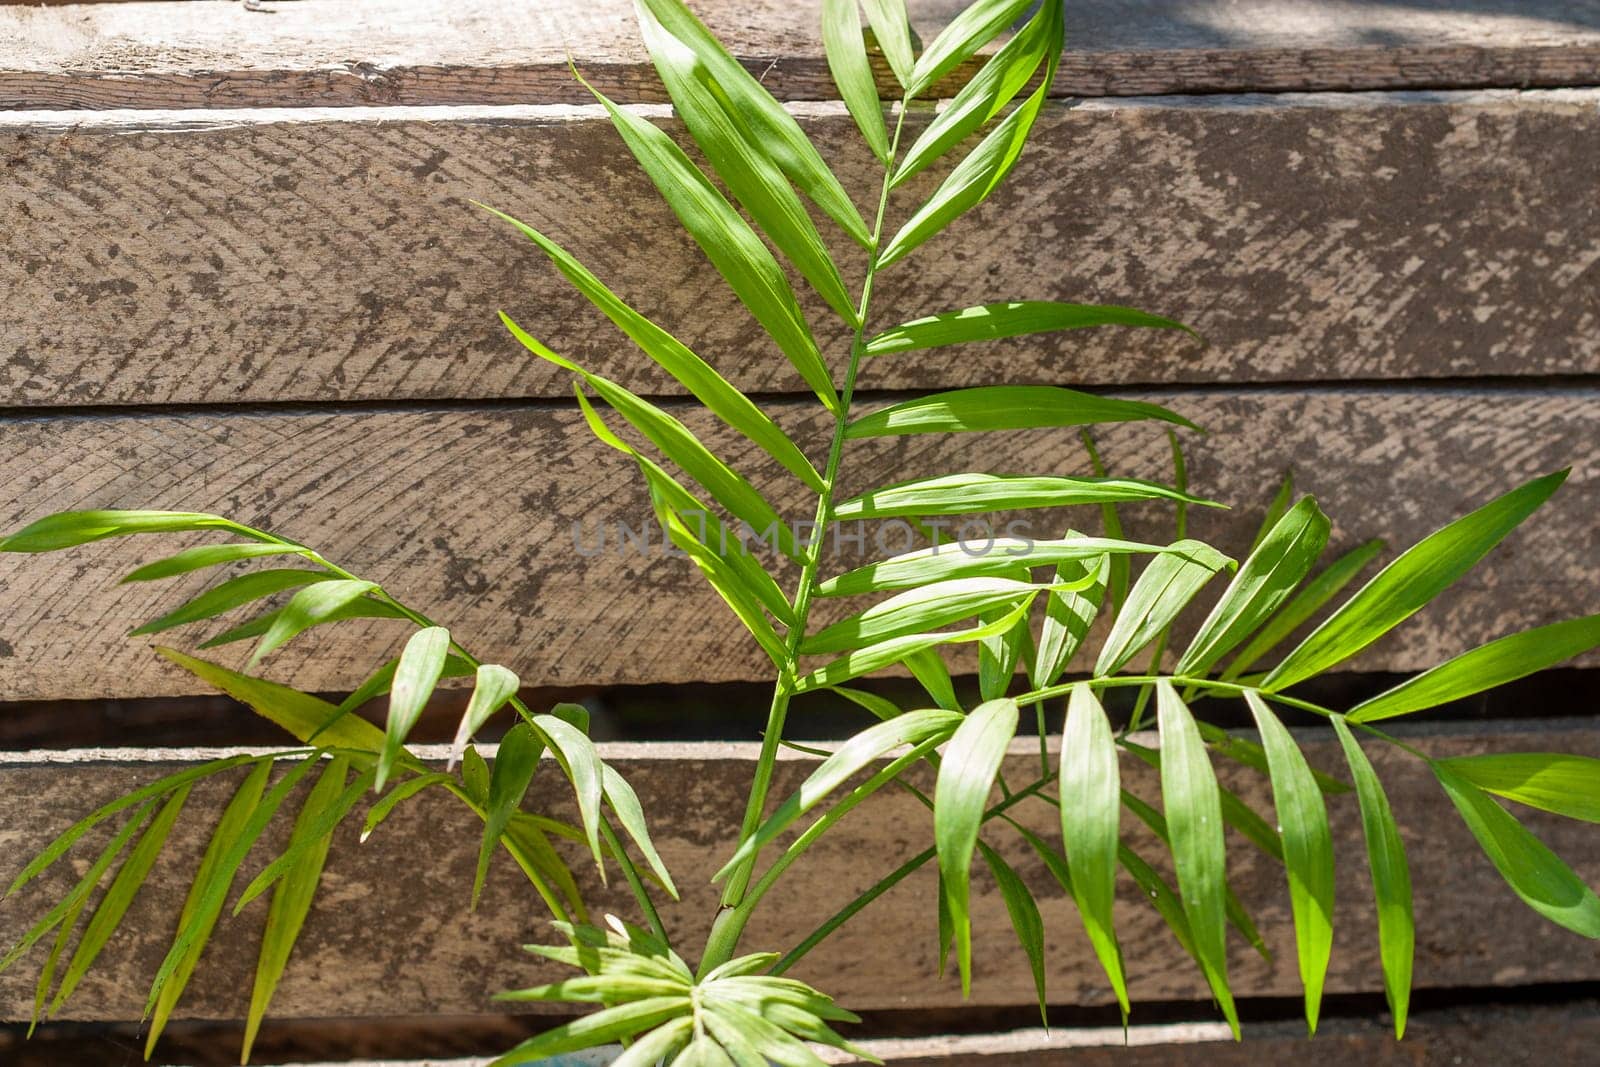 Chamaedorea Elegans, the Neanthe bella palm or parlour palm house plant leaves on a wood background